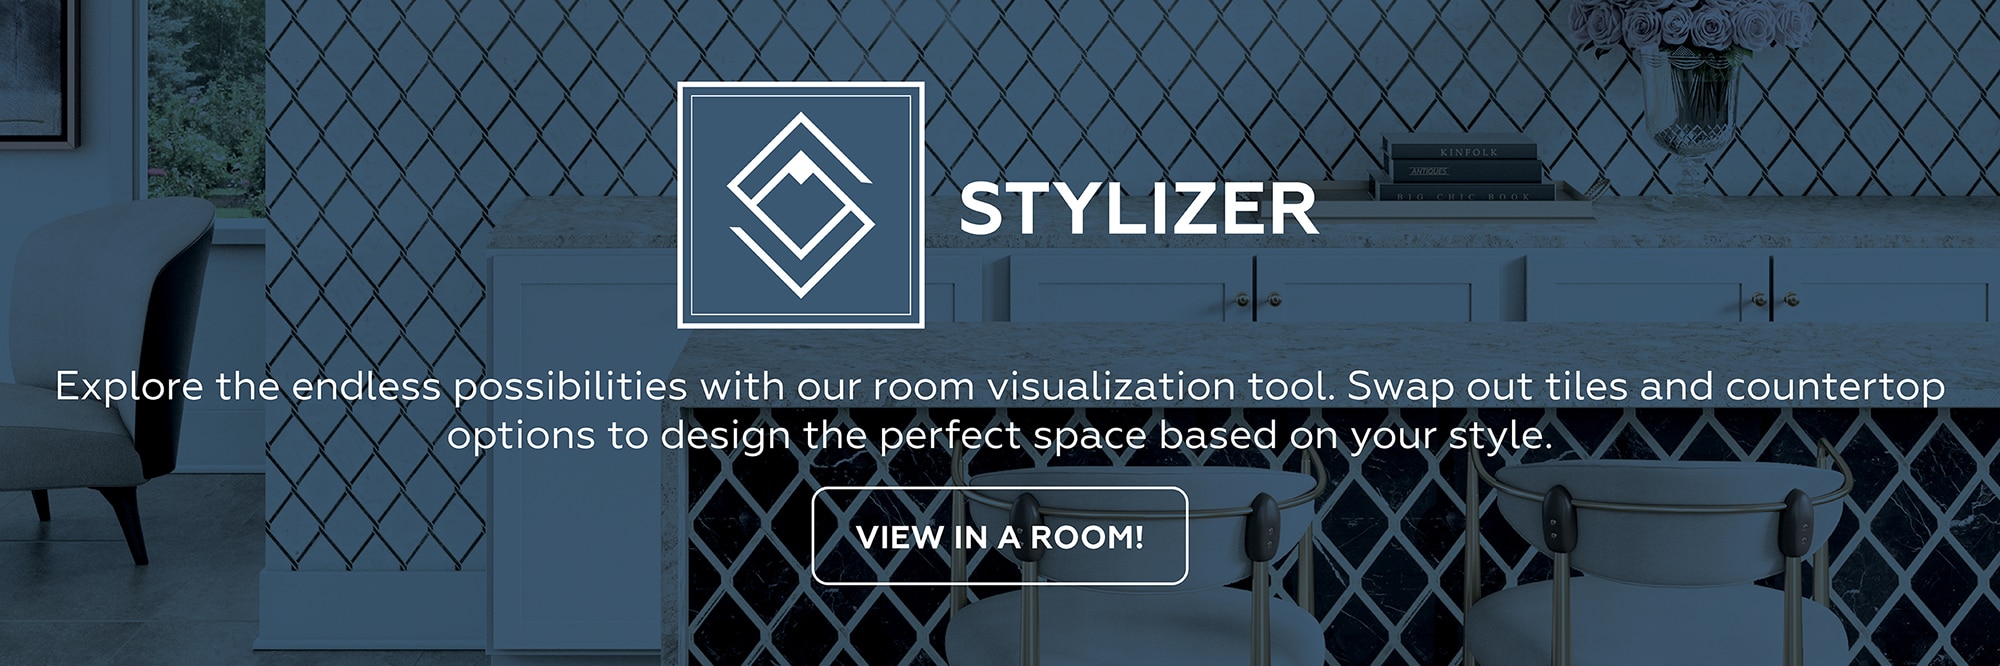 Explore the endless possibilities with our room visualization tool. Swap out tile and countertop options to design the perfect space based on your style.